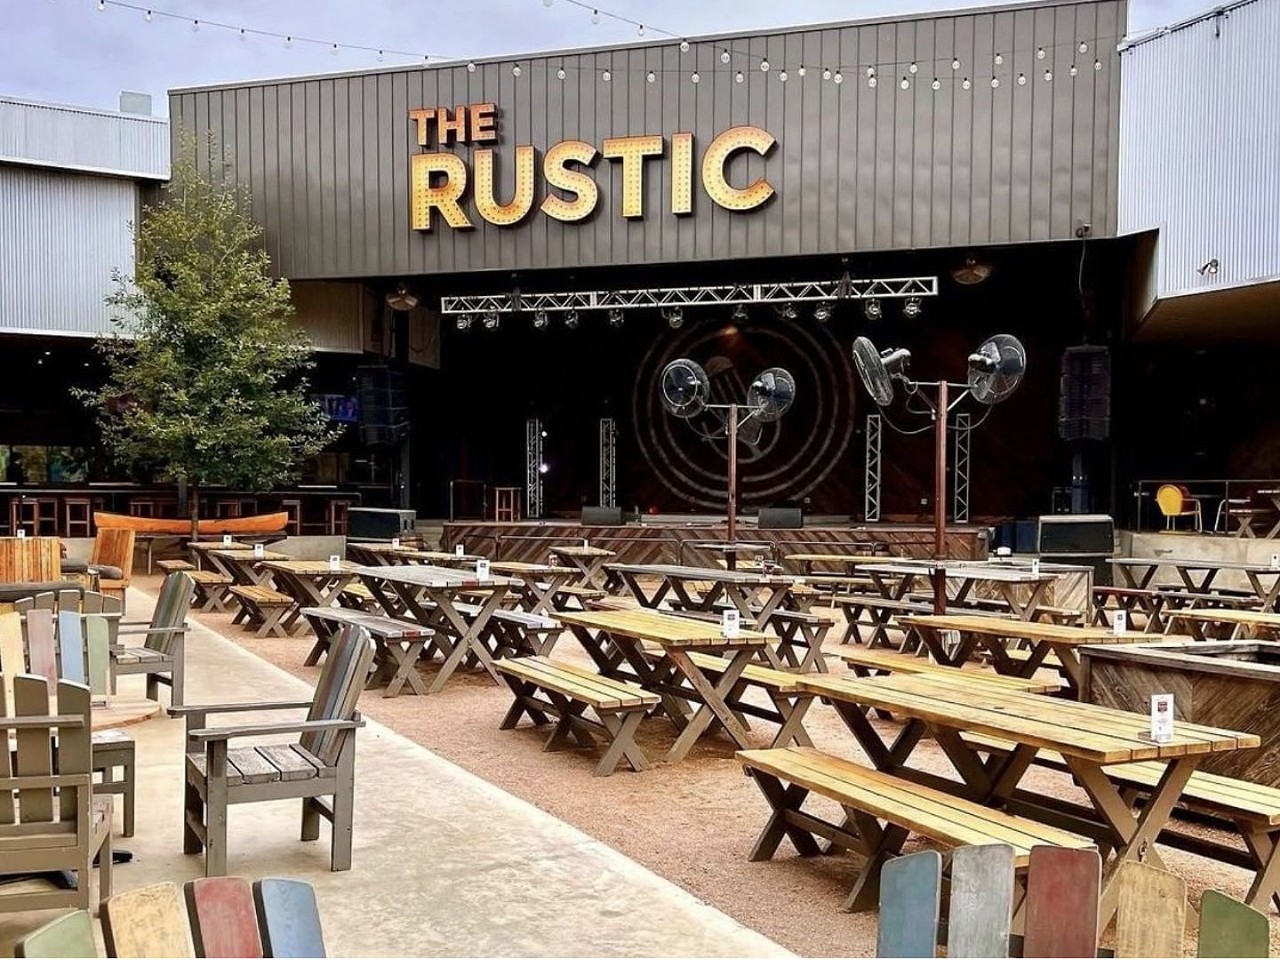 The Rustic
17619 La Cantera Parkway #204, (210) 245-7500, therustic.com/san-antonio
Sitting right outside of the loop, The Rustic offers a diverse array of foods and a huge outdoor seating area, not to mention the plethora of options on the drink menu. The venue also features regular live music for guests to enjoy as they sip their cocktails or frosty beers.